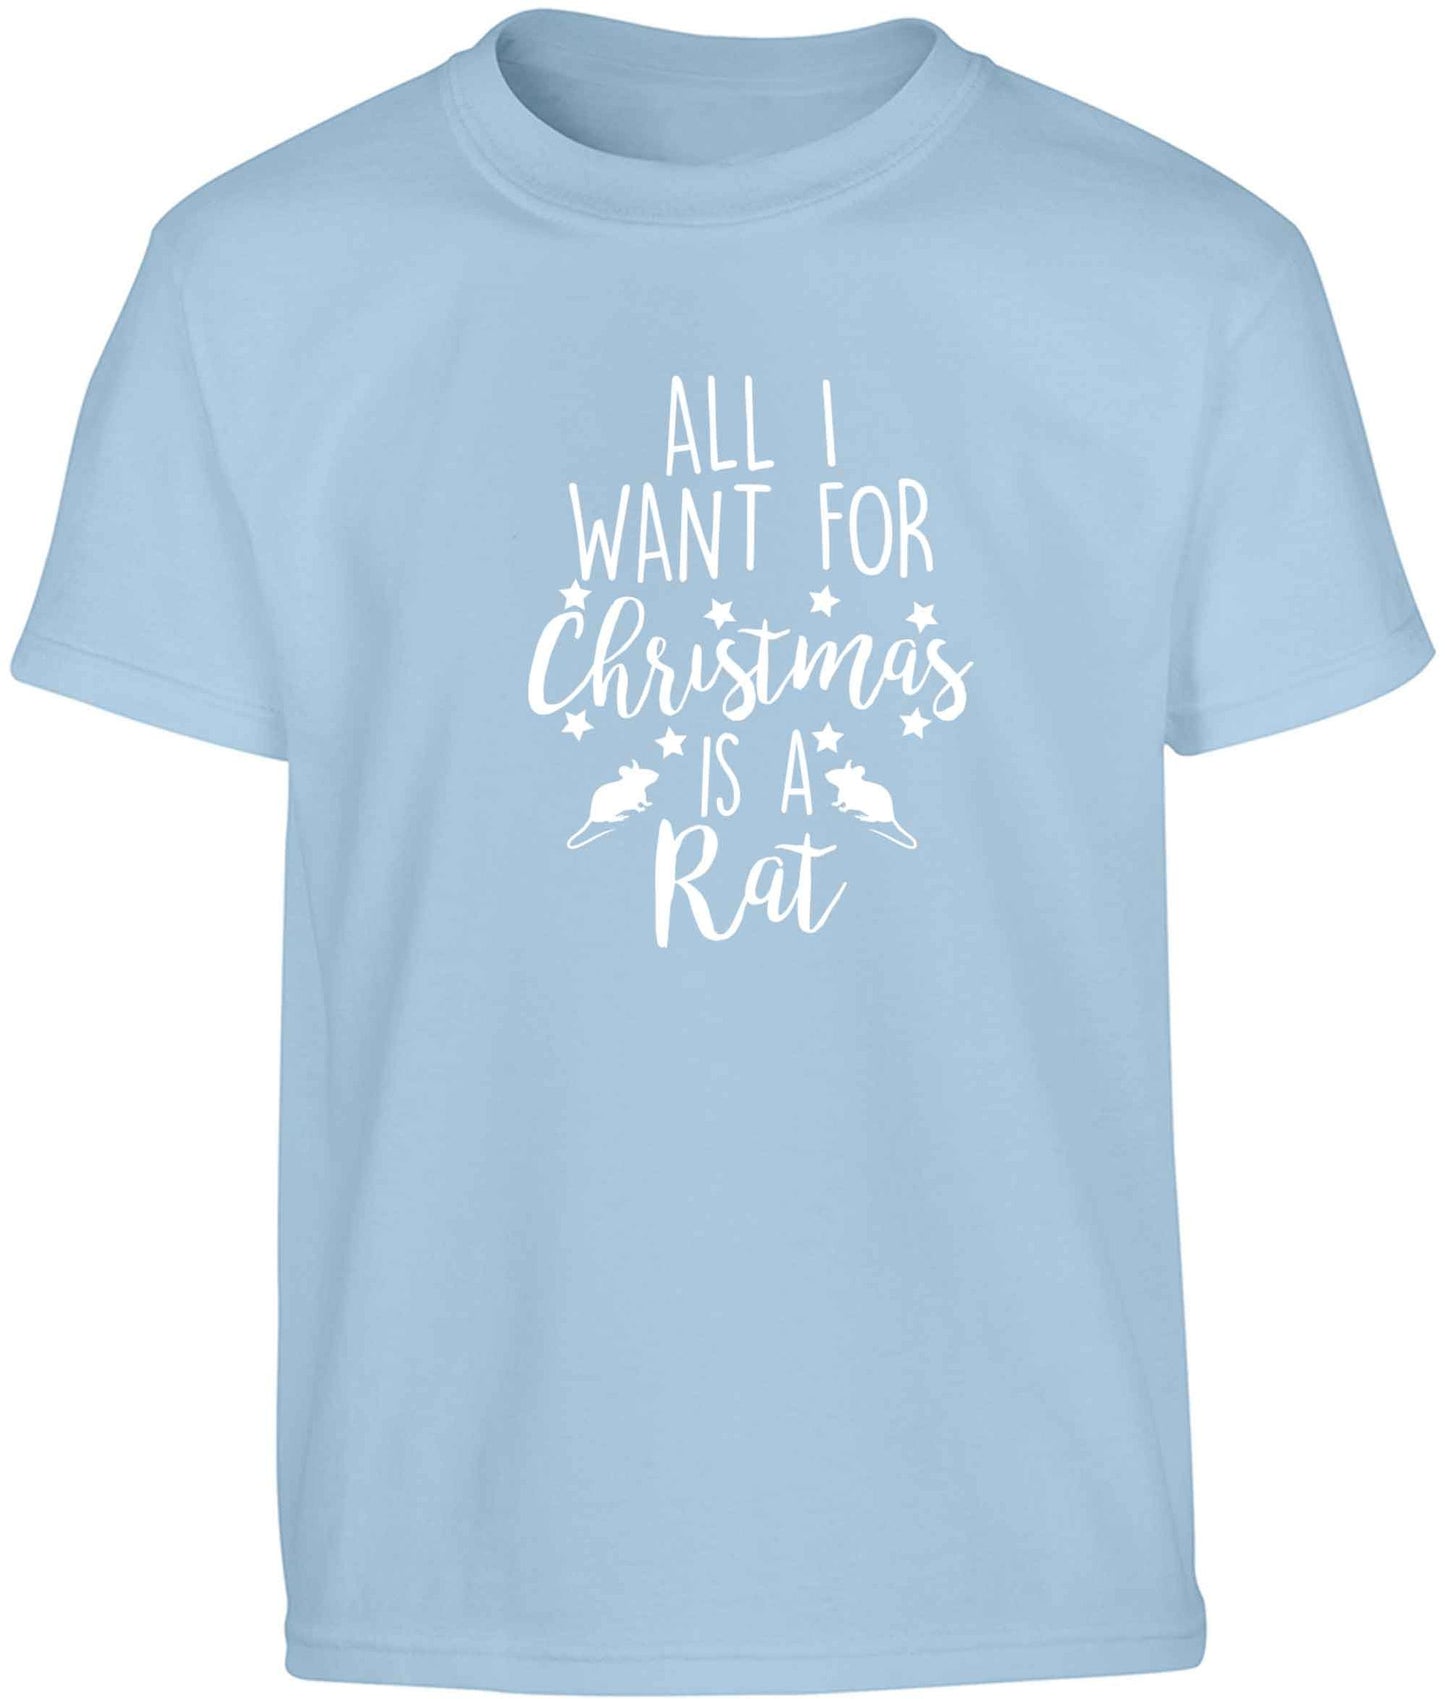 All I want for Christmas is a rat Children's light blue Tshirt 12-13 Years